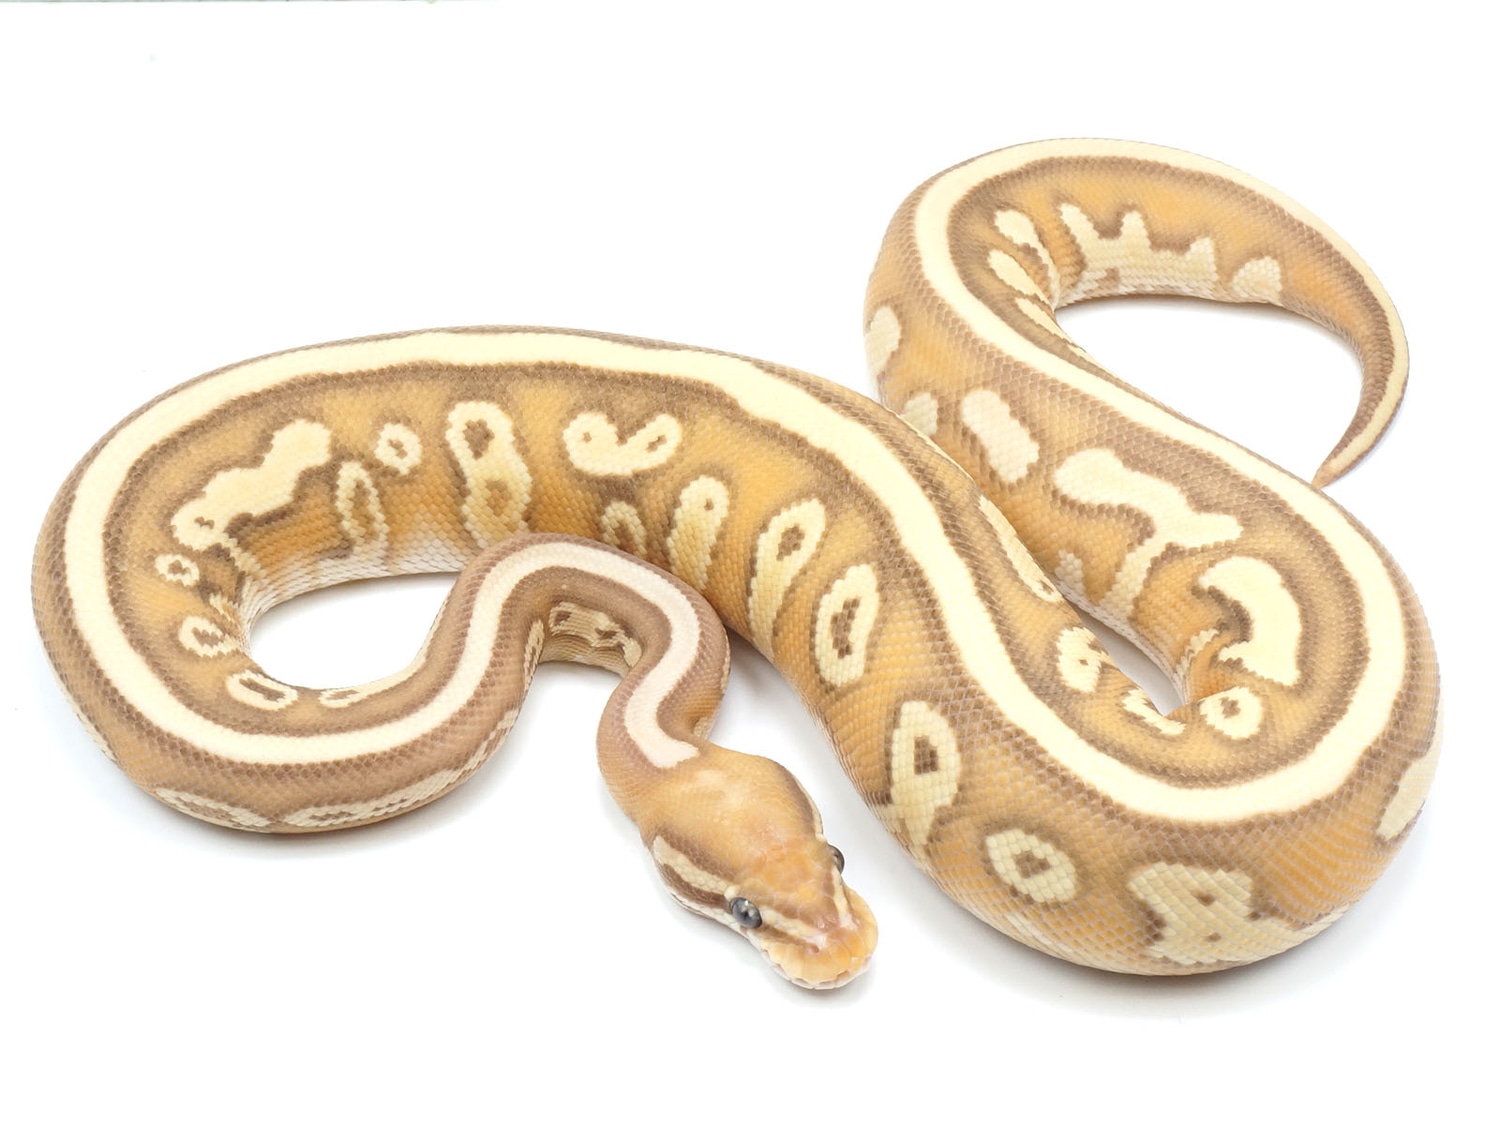 Coral Glow Lesser Malum EMG Ball Python by New England Reptile Distributors